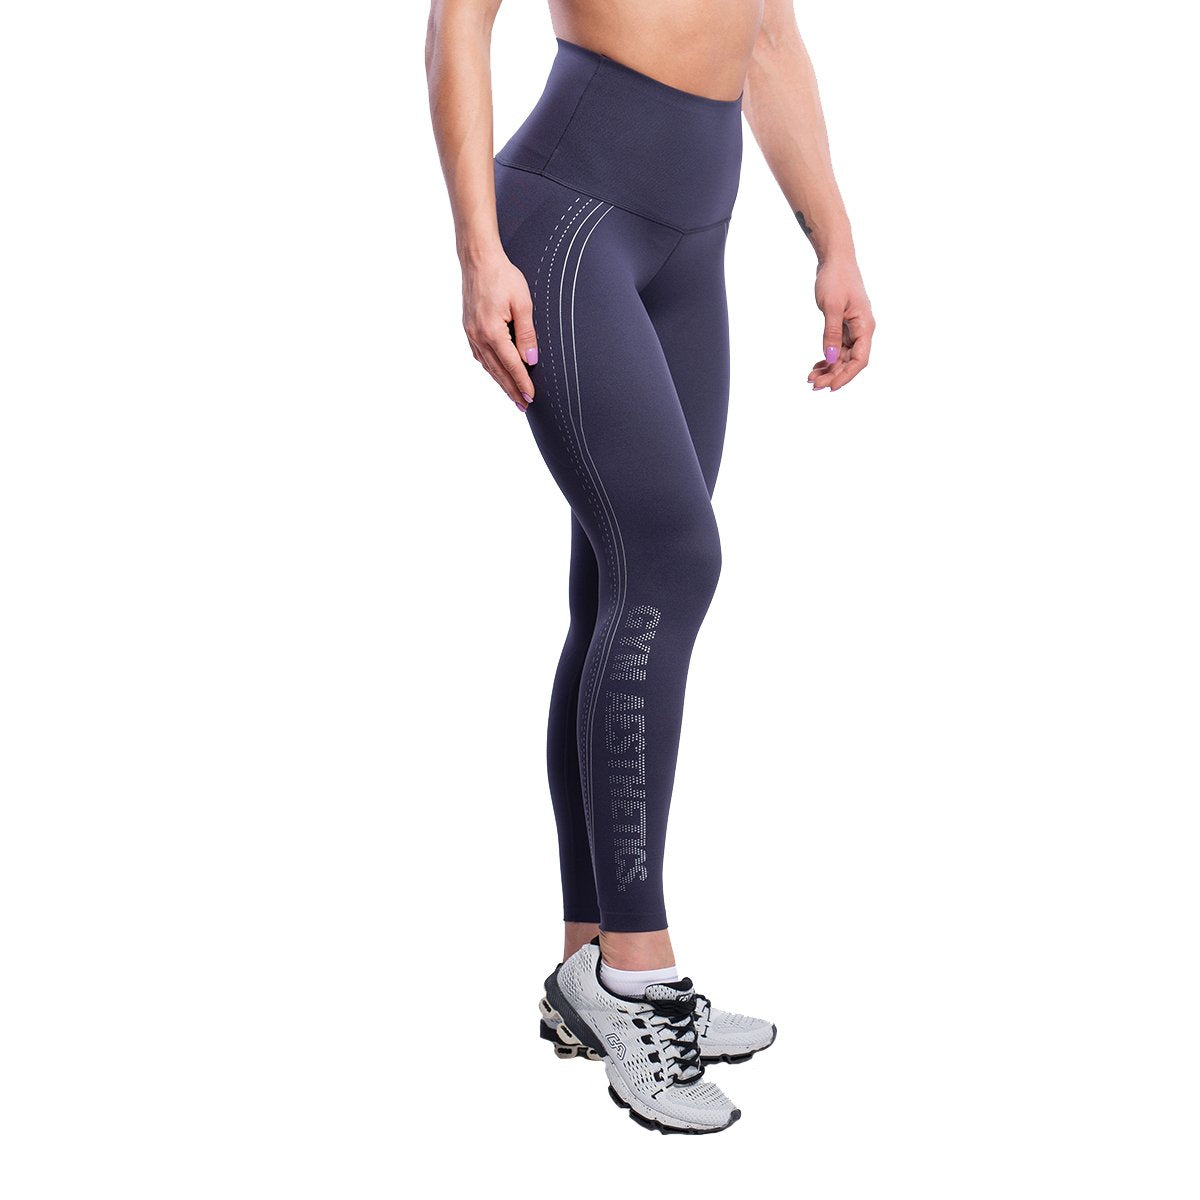 Women's Active Dri-Works Core Relaxed Fit Workout Pant Compression Legging  Women Compression Fitness Tights Pants High Waist Fitness Pants 